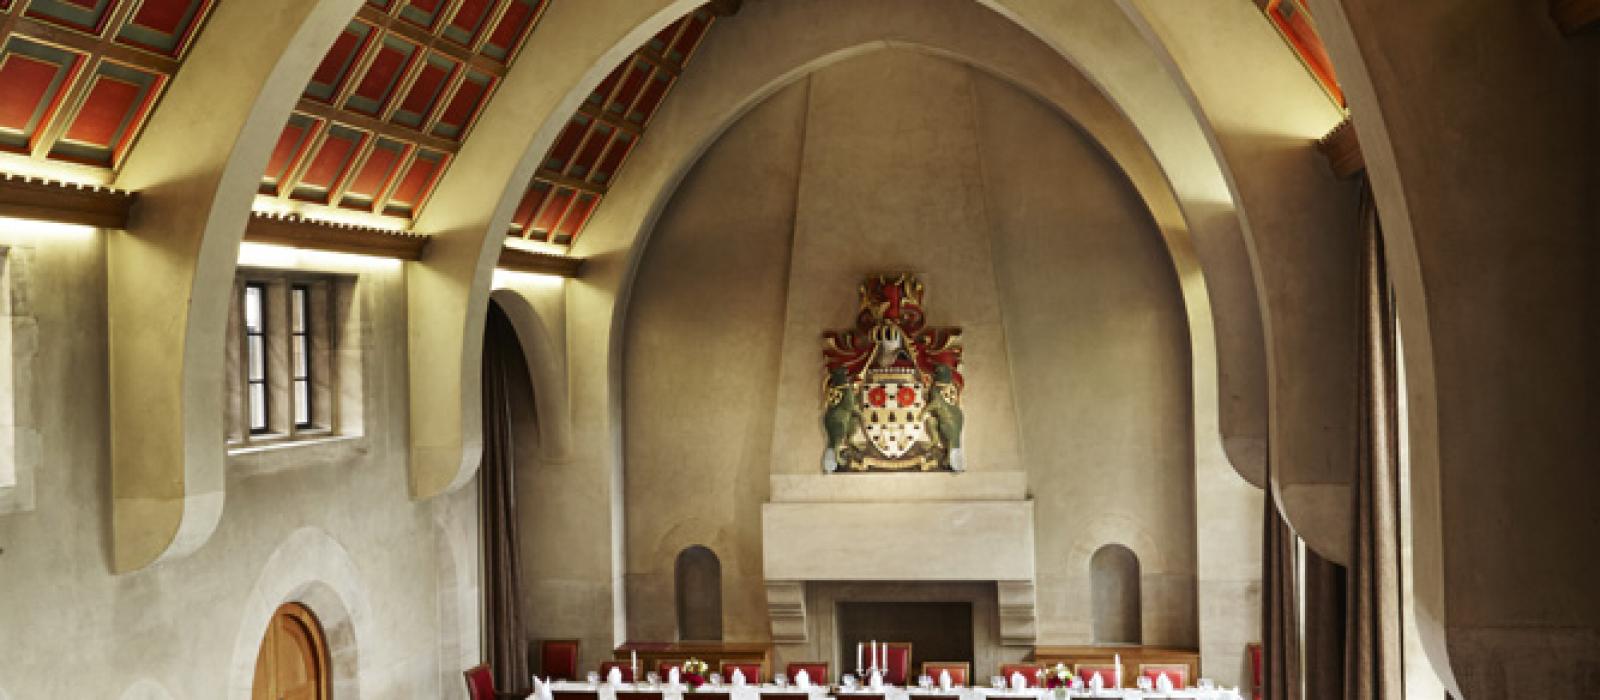 Dining Hall, Nuffield College